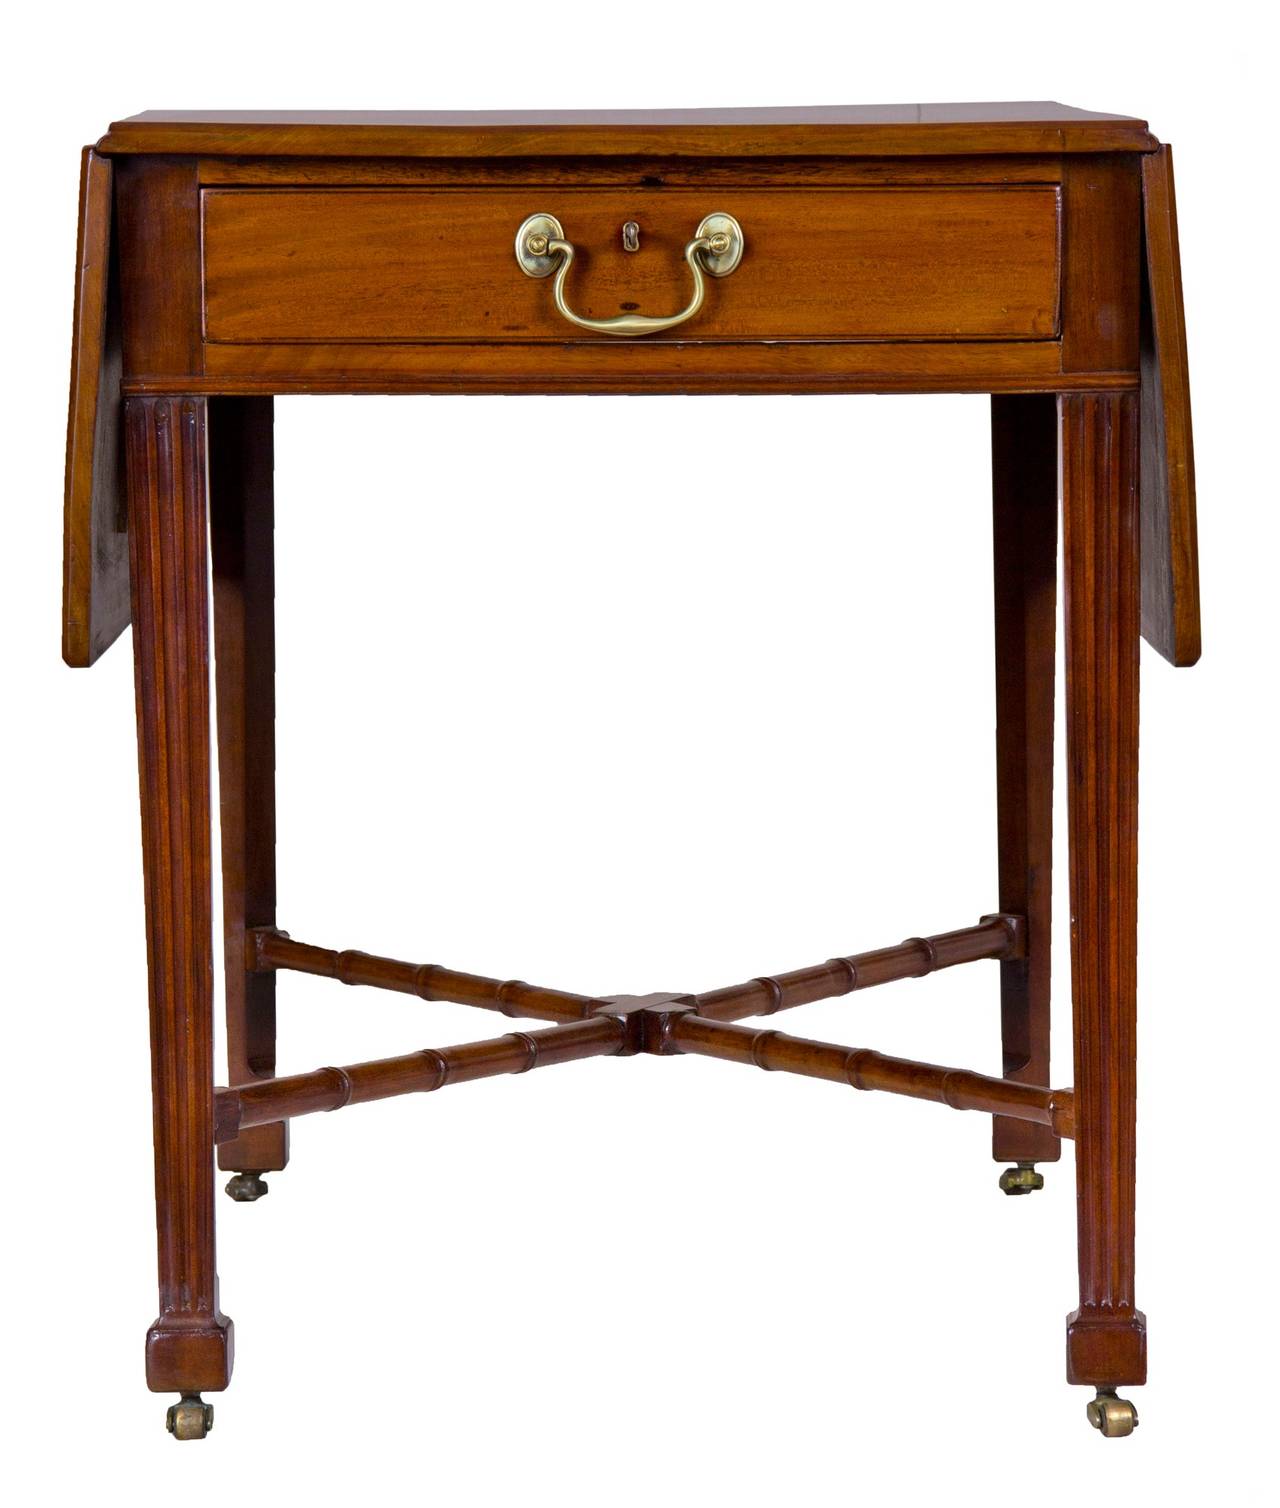 Chippendale Mahogany Pembroke Table with Carved Bamboo Stretchers, circa 1800 For Sale